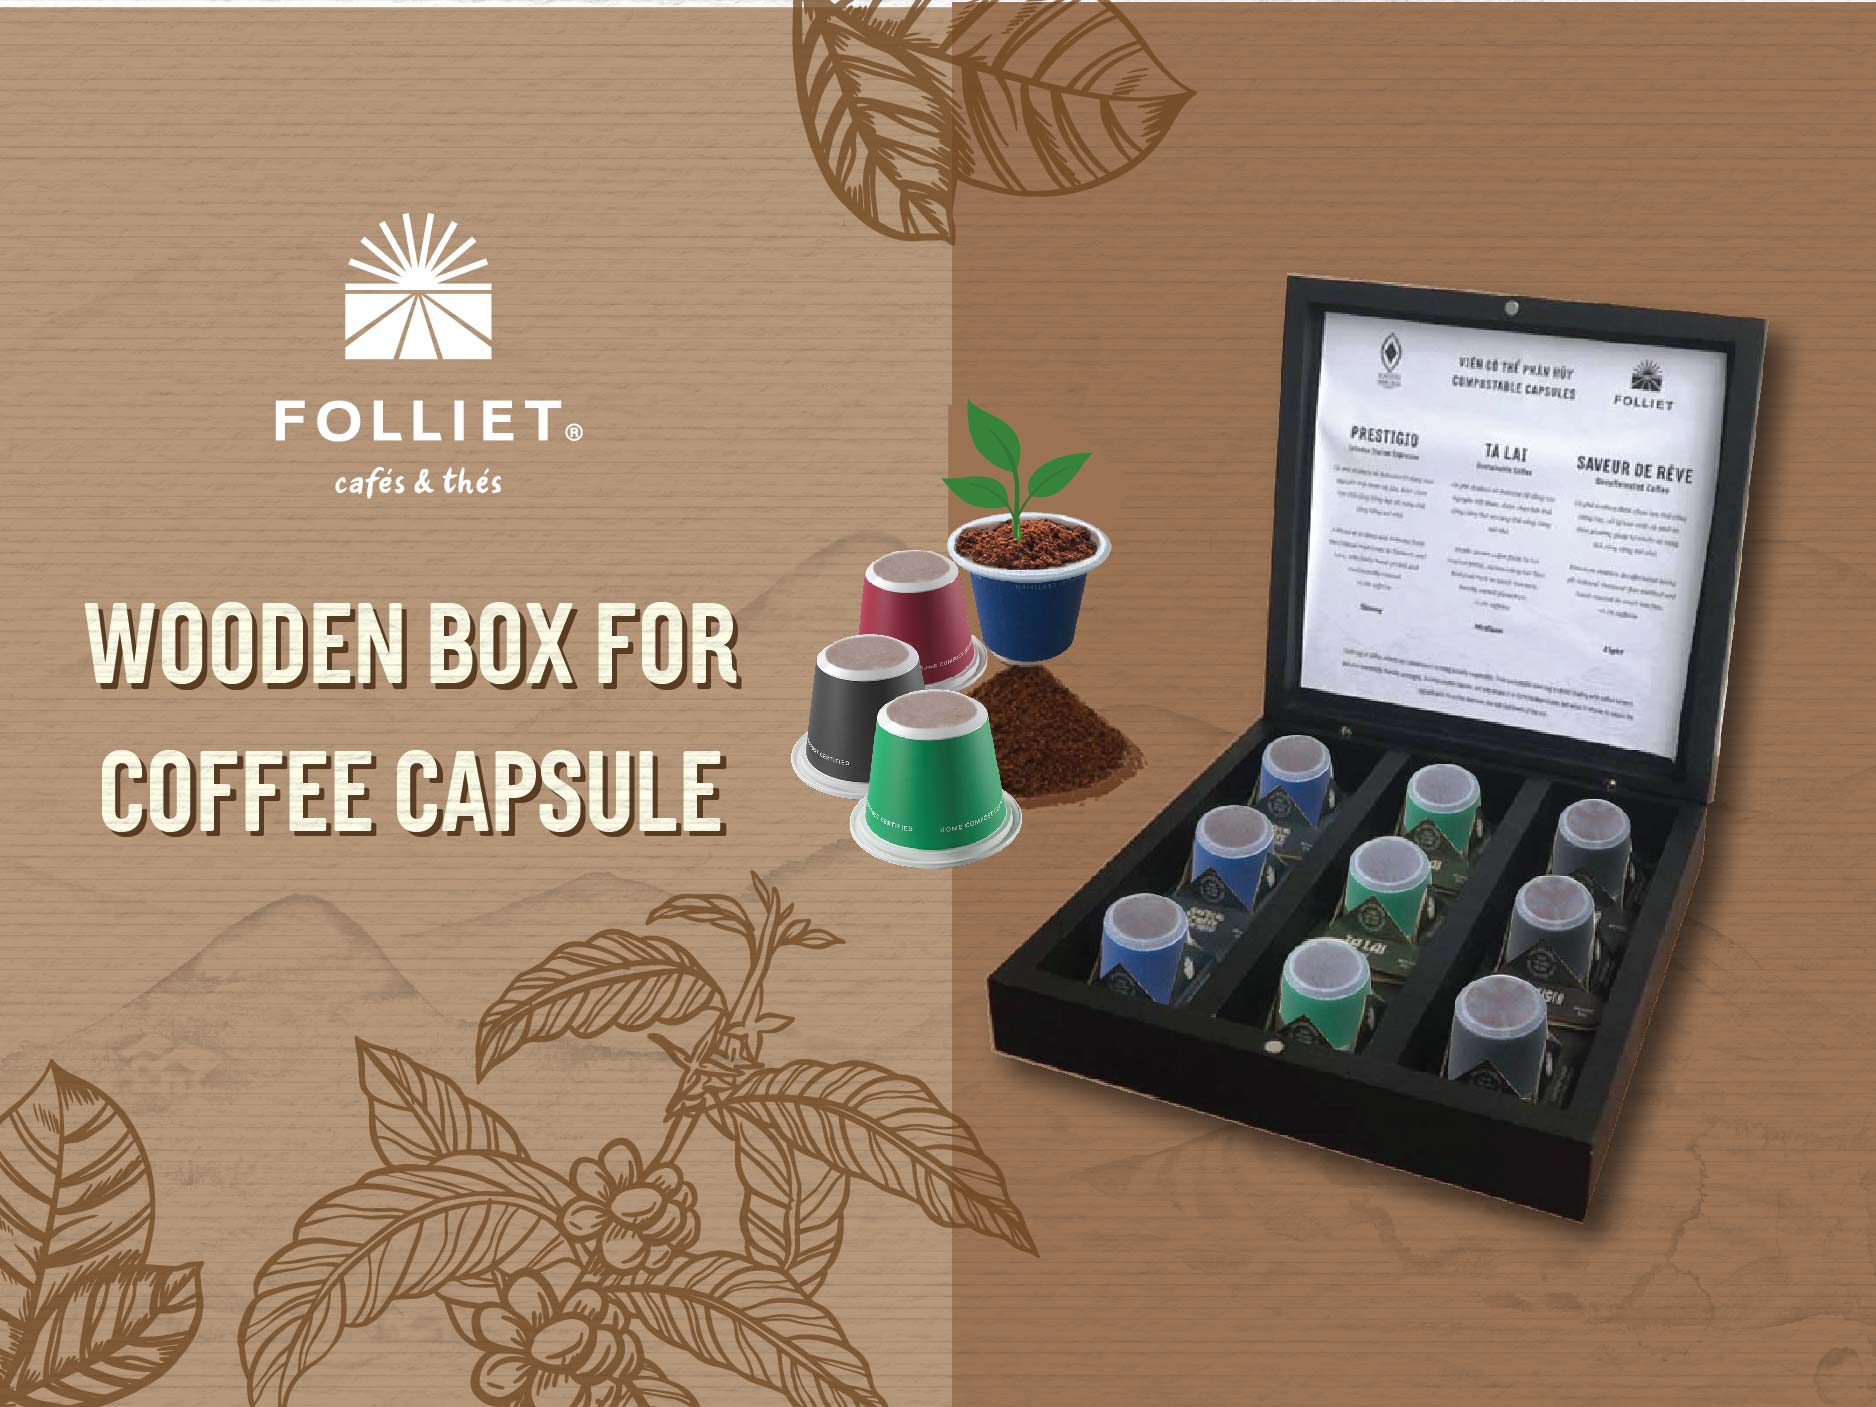 Folliet® Home Compostable Coffee Capsules